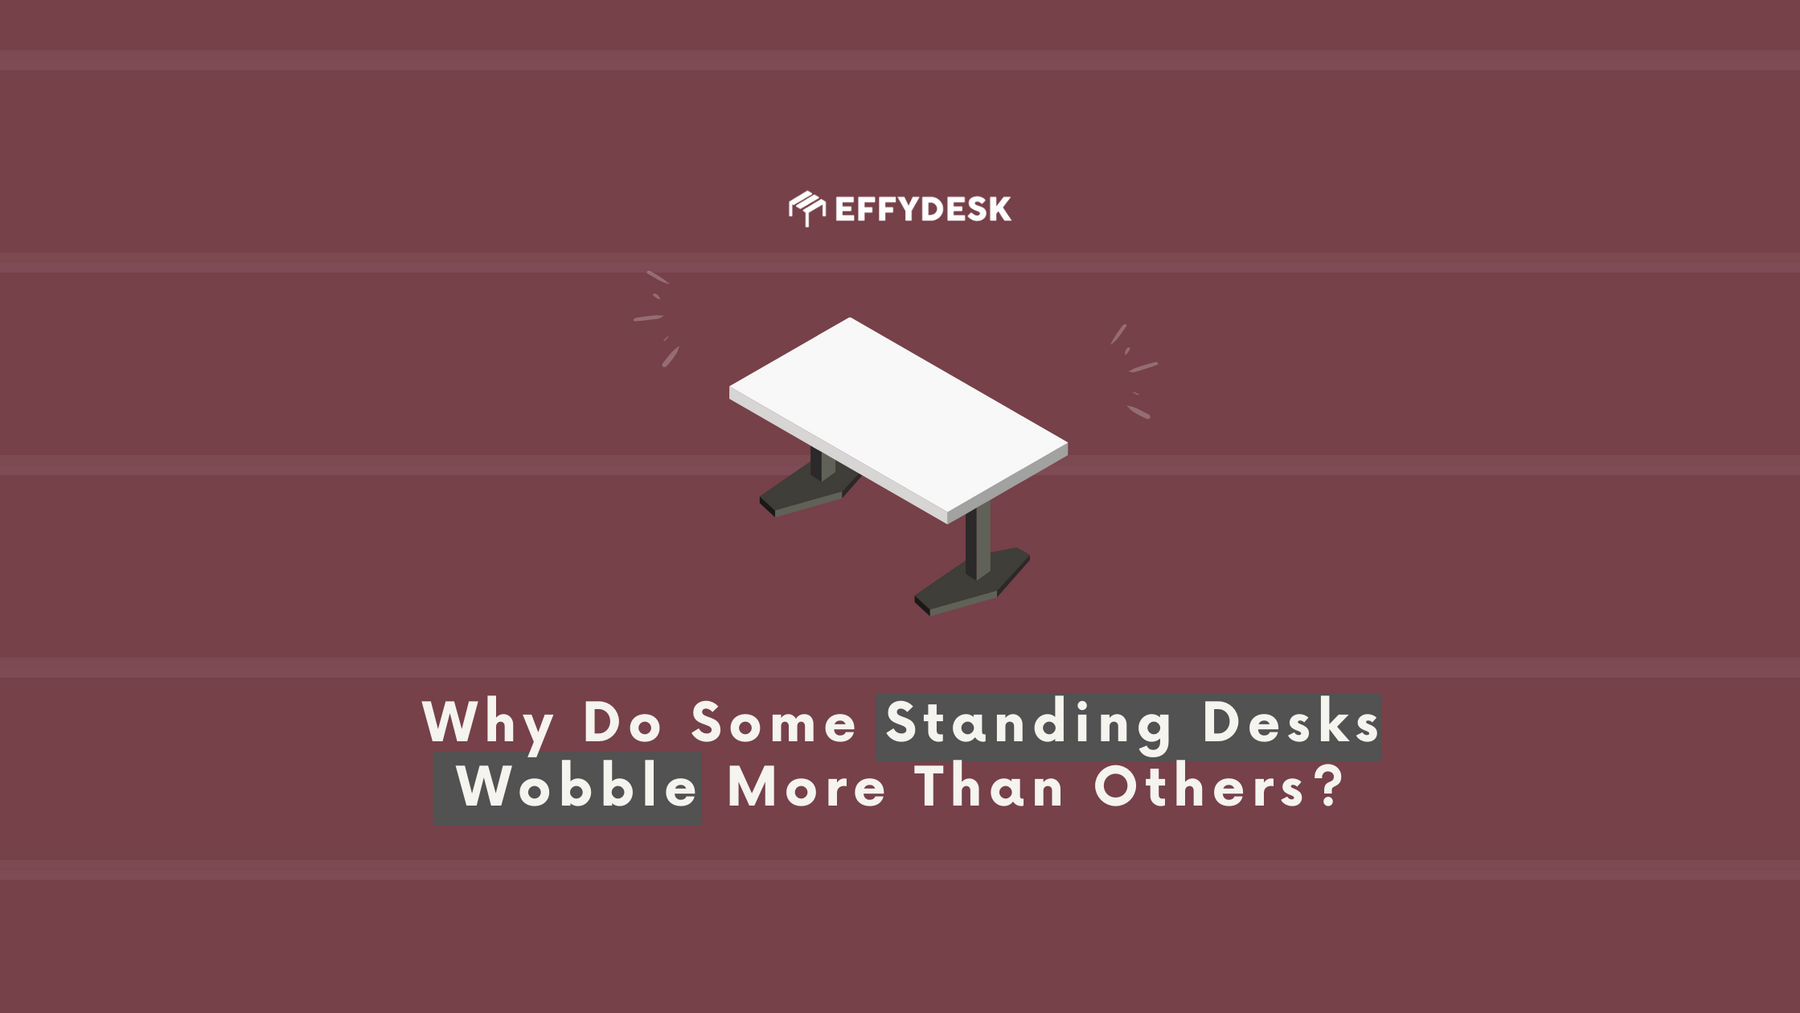 Why Do Some Standing Desks Wobble More Than Others?